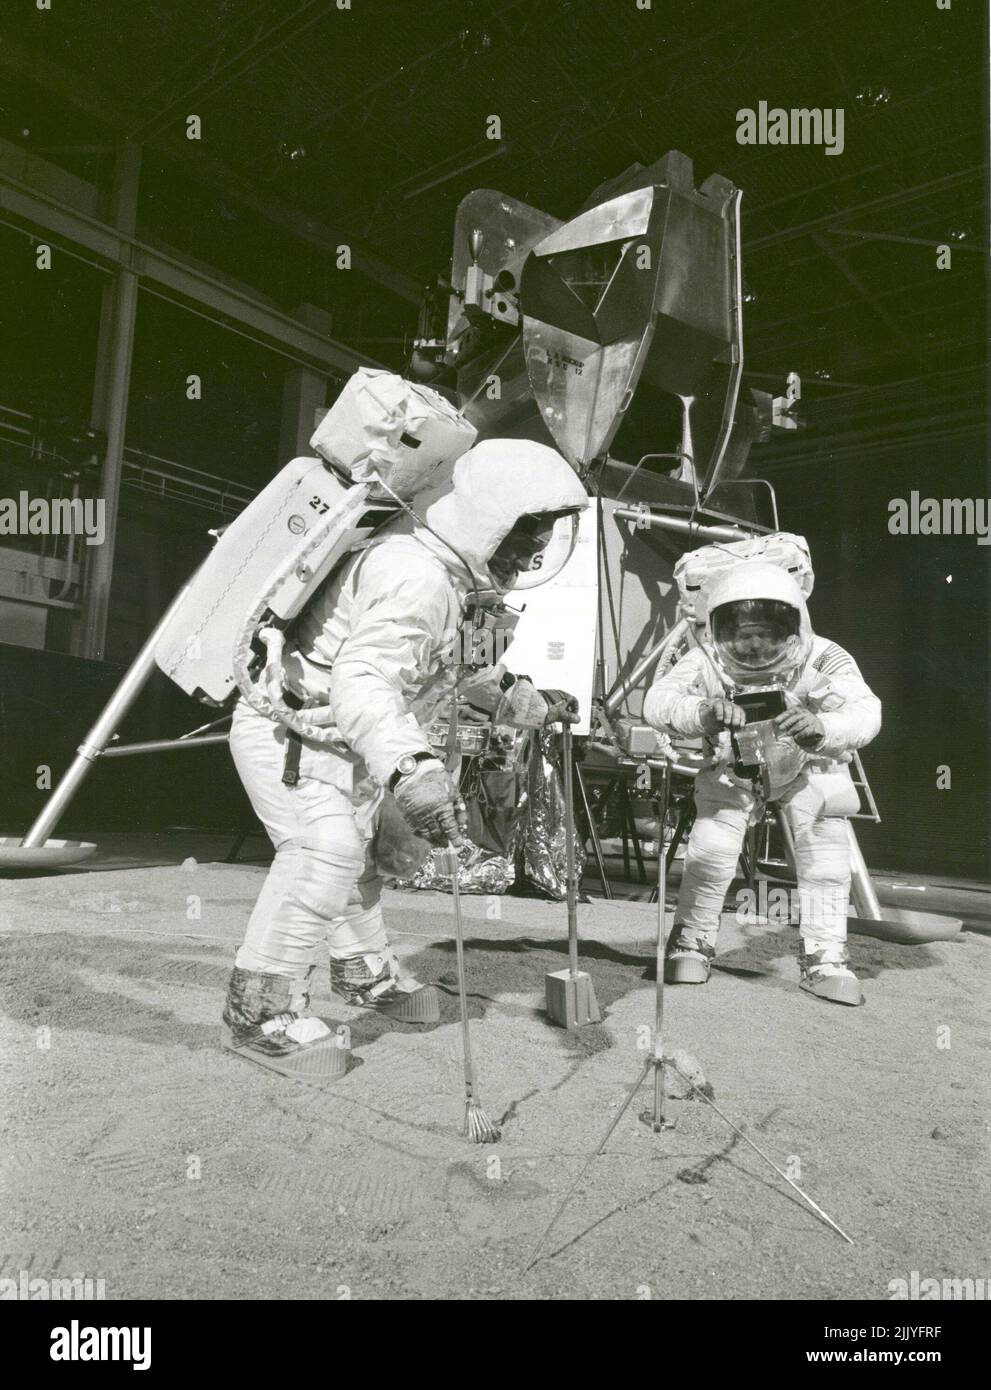 Usa. 22nd Apr, 1969. Two members of the Apollo 11 lunar landing mission participate in a simulation of deploying and using lunar tools on the surface of the Moon during a training exercise on April 22, 1969. Astronaut Buzz (Aldrin Jr. on left), lunar module pilot, uses a scoop and tongs to pick up a soil sample. Astronaut Neil A. Armstrong, Apollo 11 commander, holds a bag to receive the sample. In the background is a Lunar Module mockup. Credit: NASA/ZUMA Press Wire Service/ZUMAPRESS.com/Alamy Live News Stock Photo